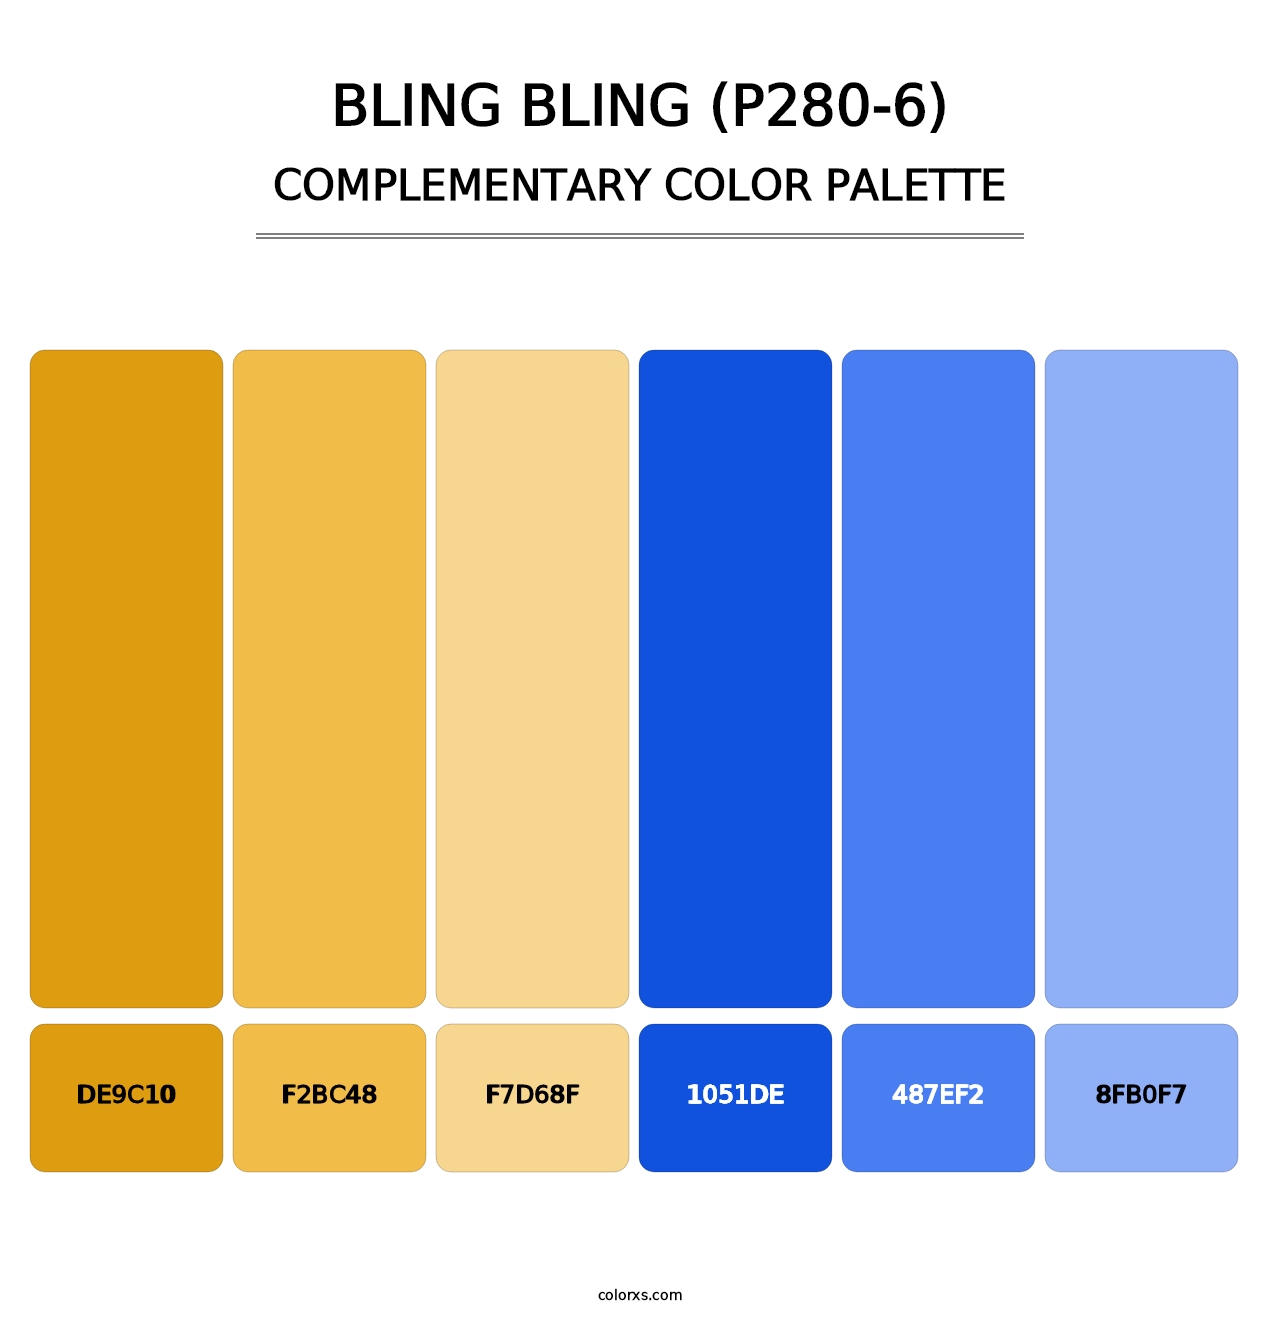 Bling Bling (P280-6) - Complementary Color Palette